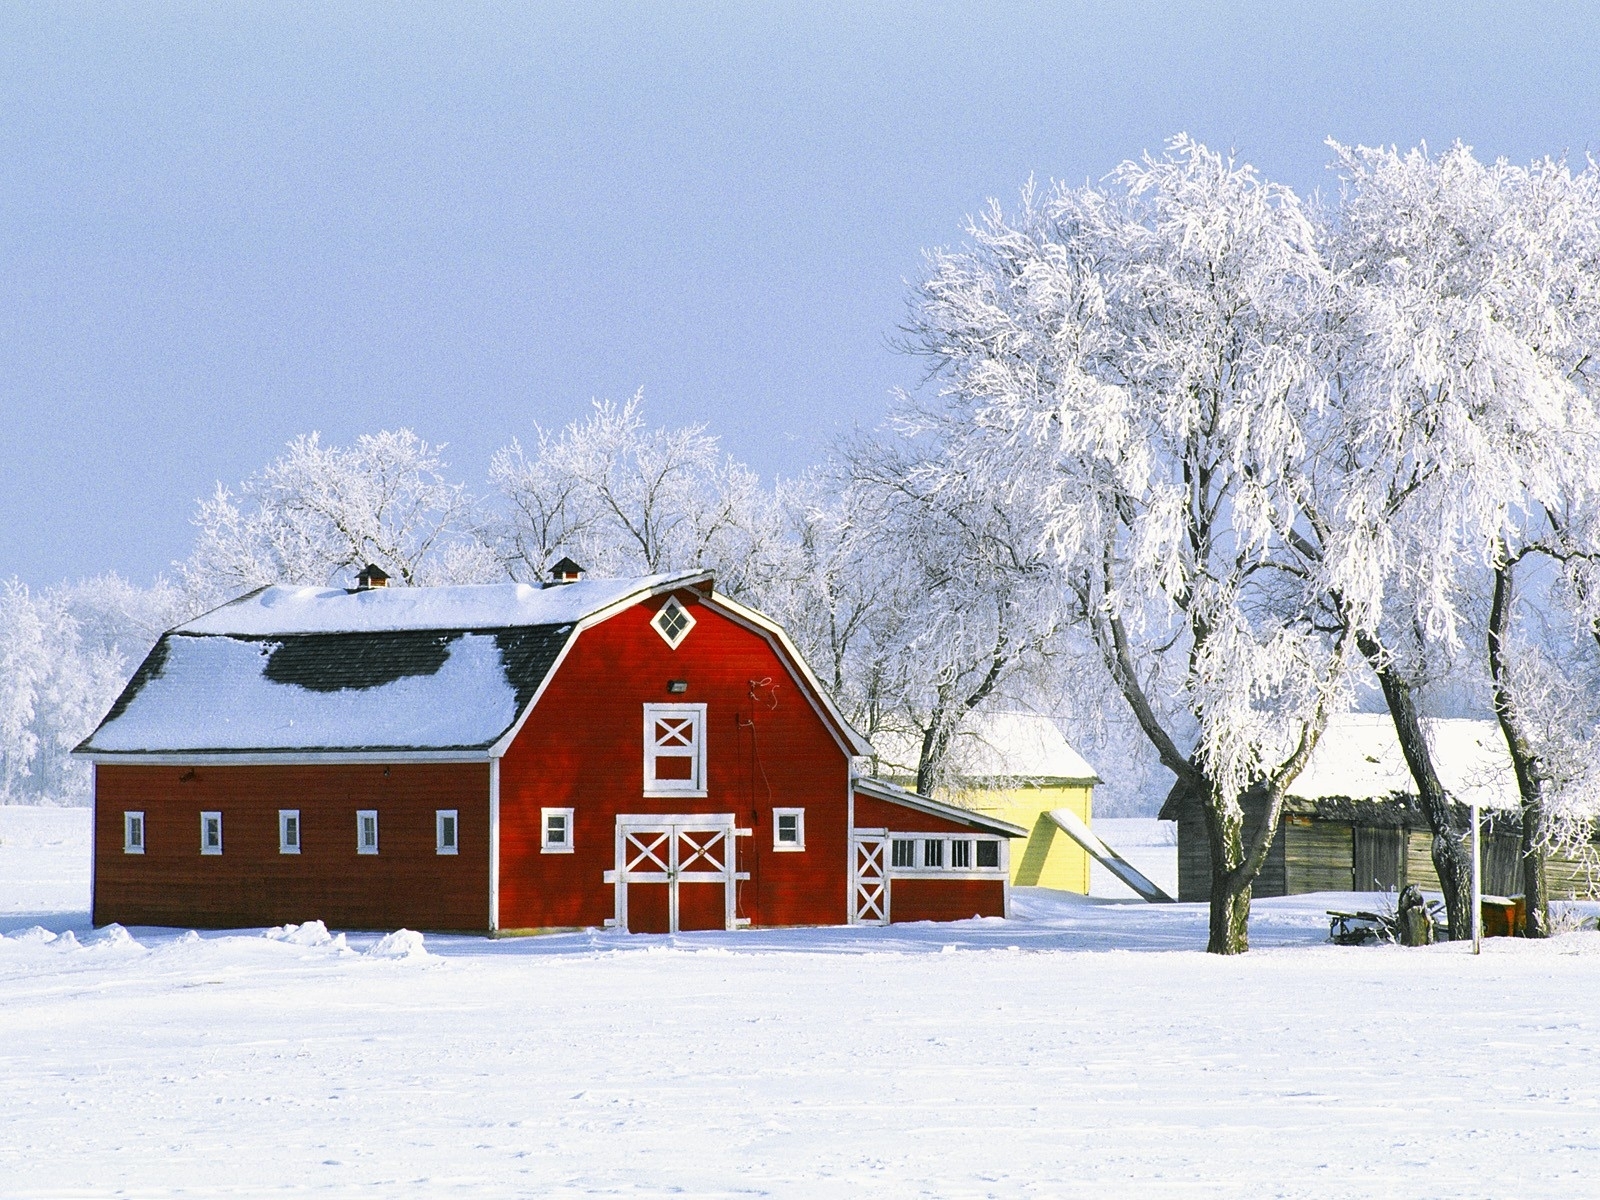 Red Barn in Snow Wallpaper. Red